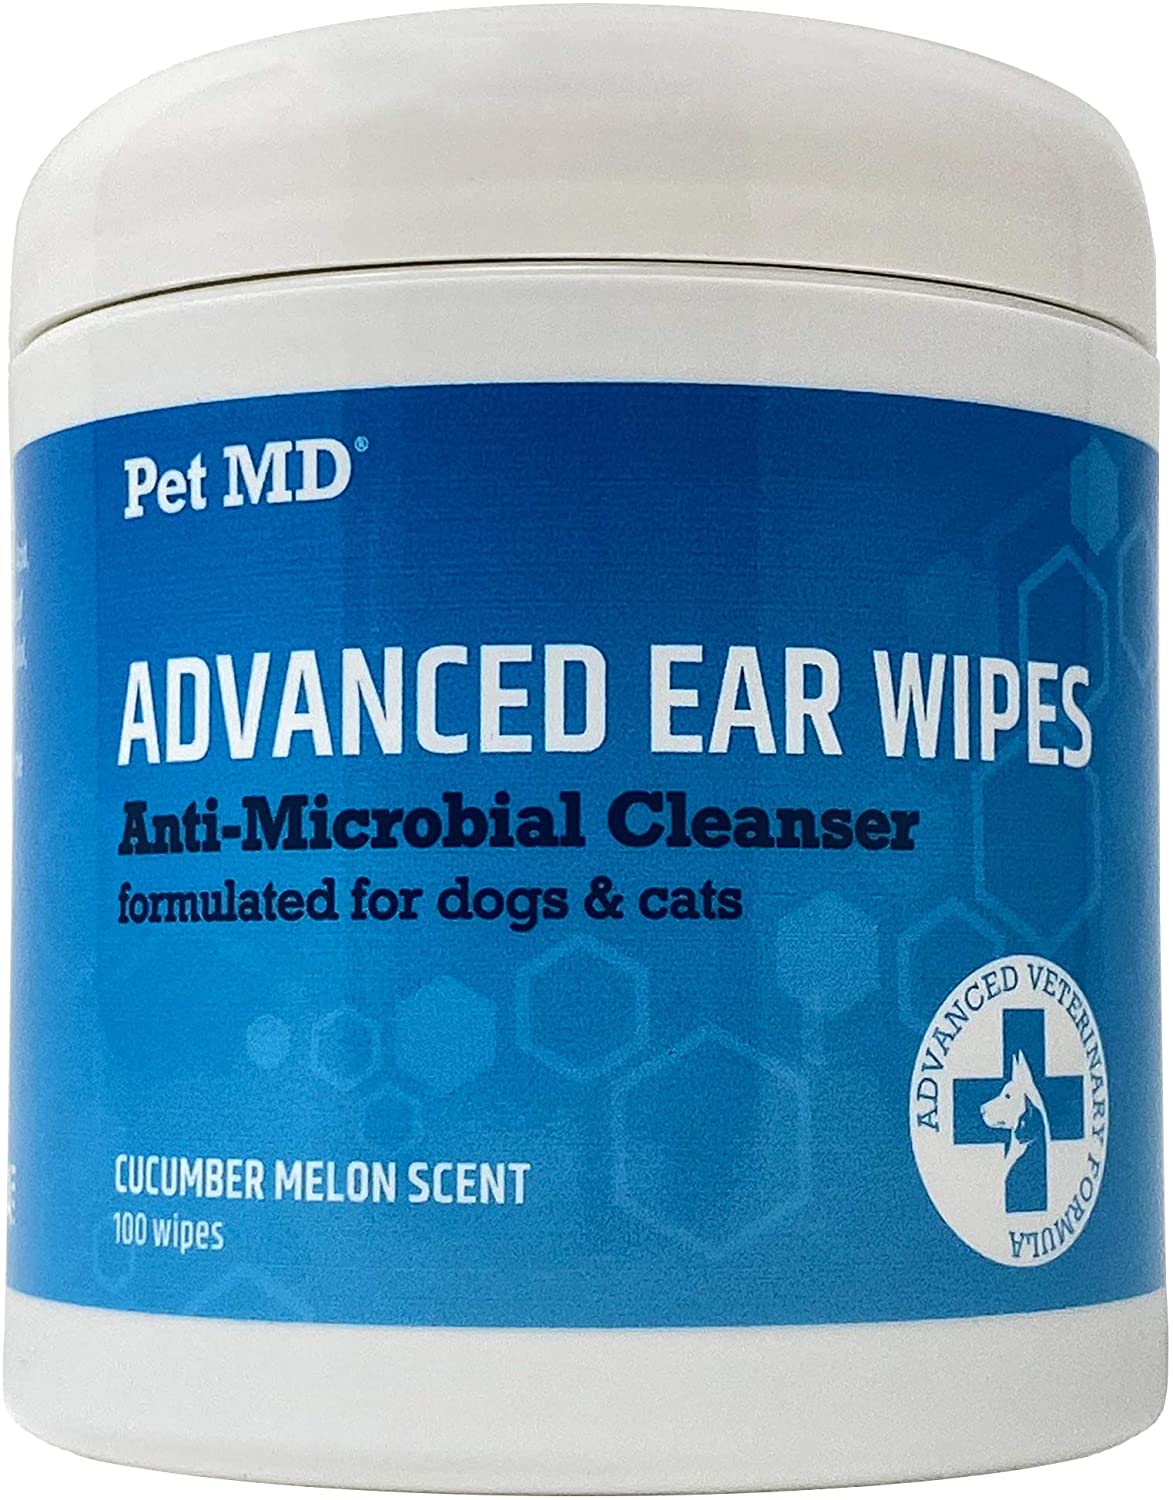 Pet MD Cat and Dog Ear Cleaner Wipes - Advanced Otic Veterinary Ear Cleaner Formula - Dog Ear Infection Treatment Helps Eliminate Ear Infections - 100 Alcohol Free Ear Wipes with Soothing Aloe Vera